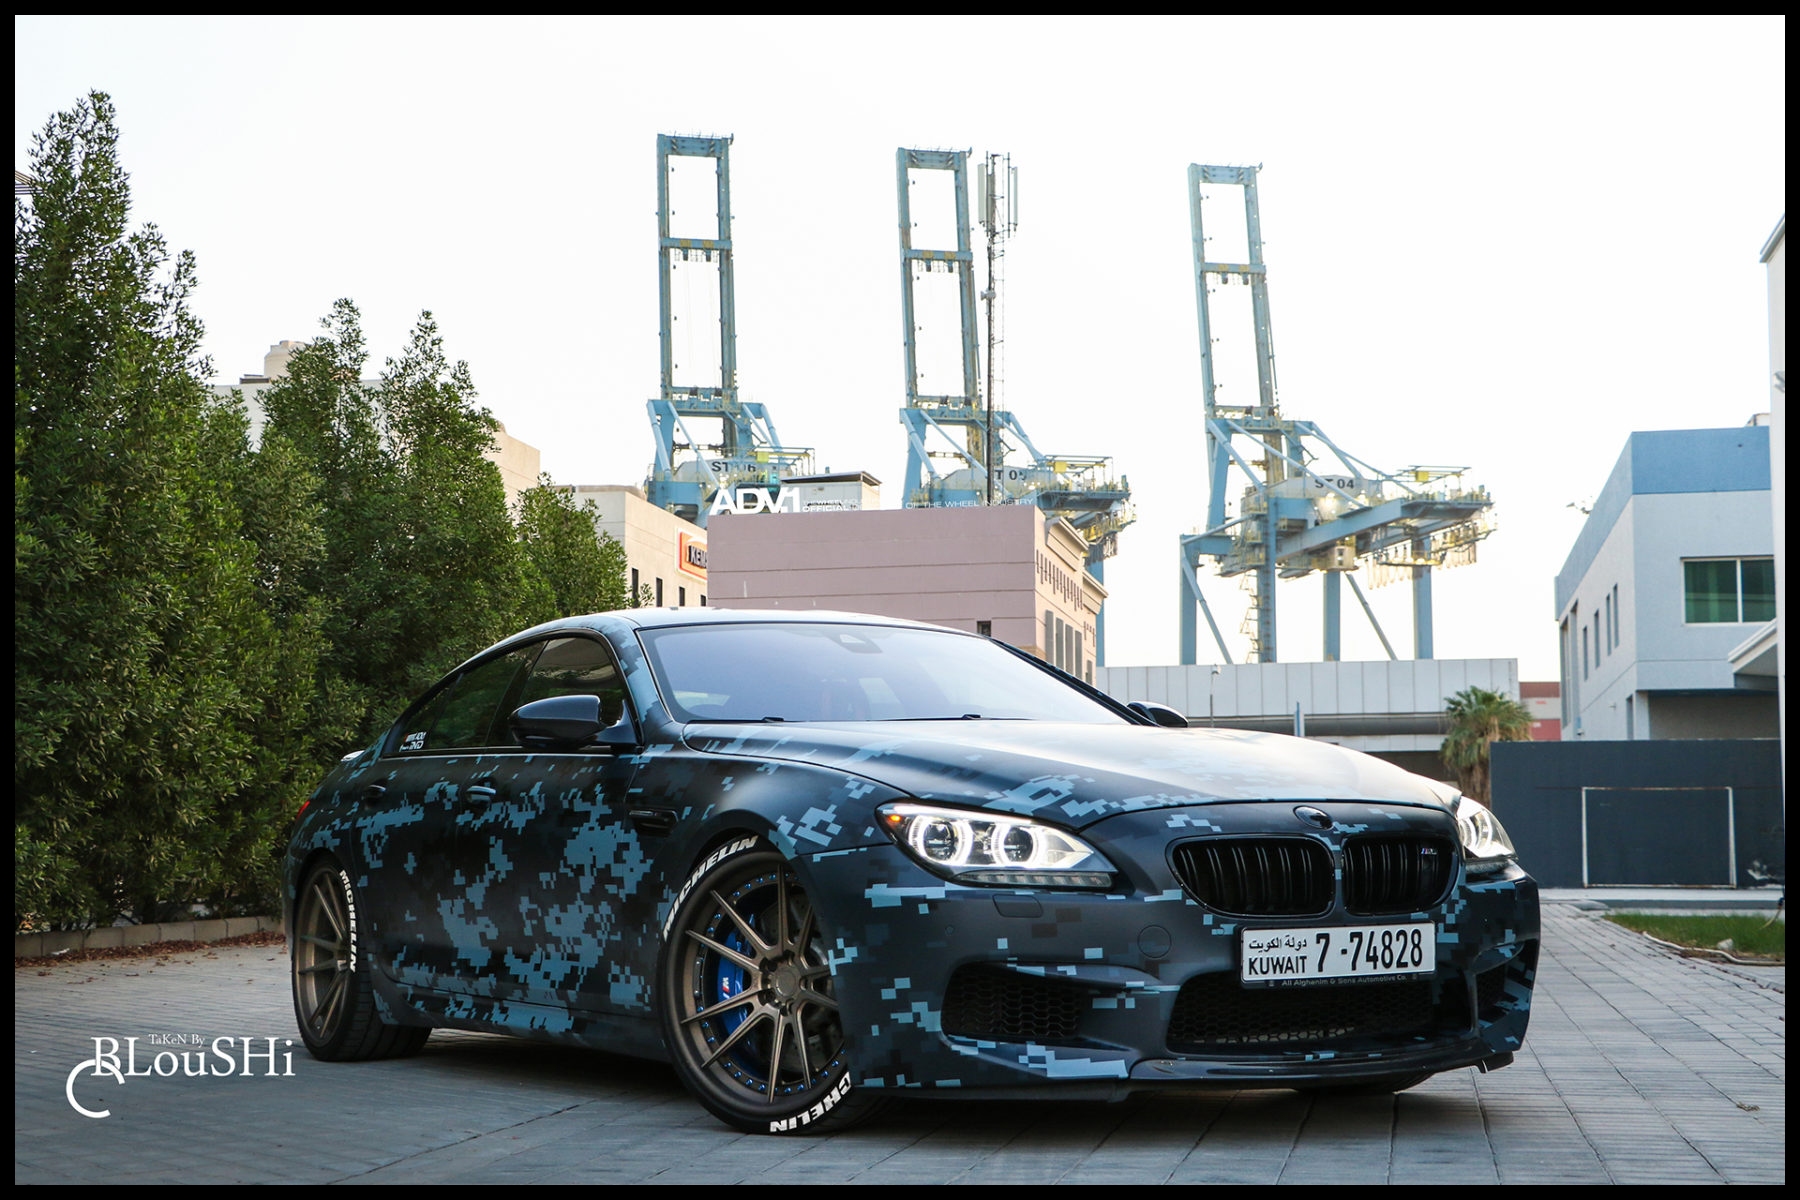 Blue Digital Camo Wrapped BMW M6 Gran Coupe With ADV 1 Wheels Wallpaper